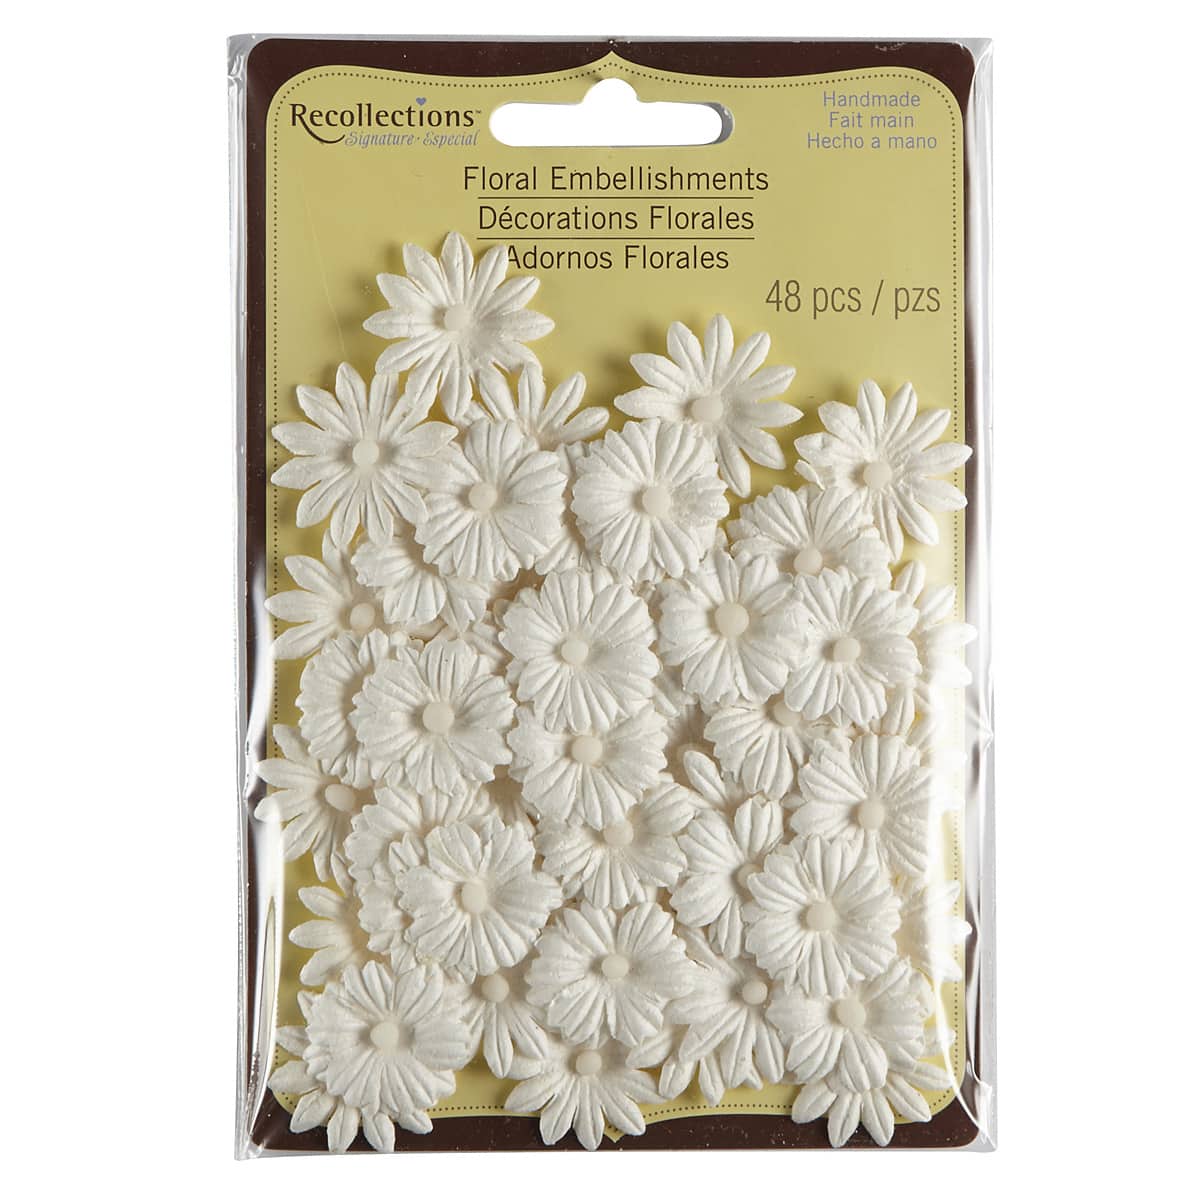 Recollections™ Signature Floral Embellishments | Michaels